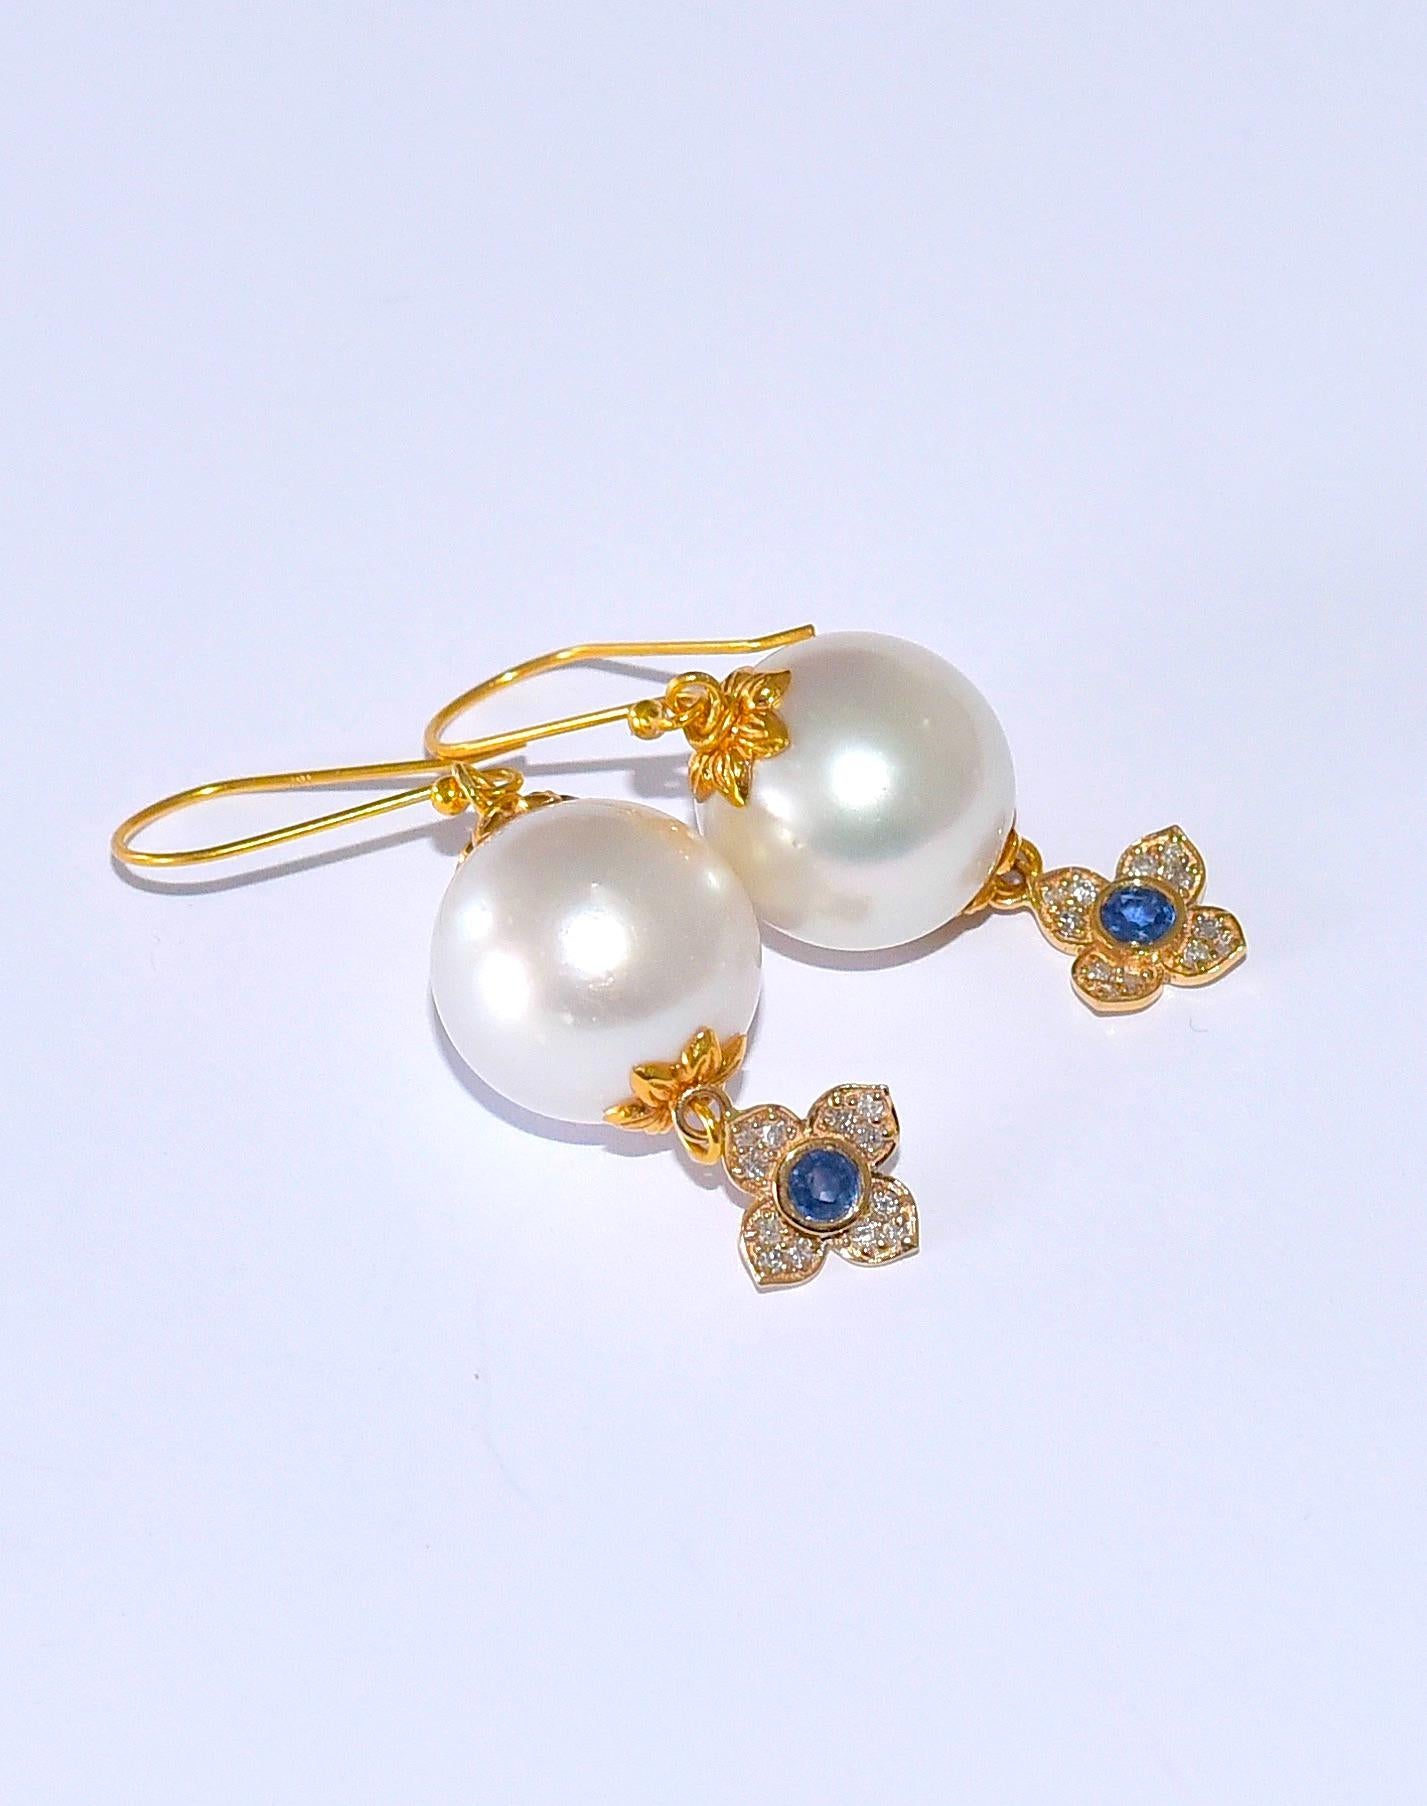 Women's South Sea Pearl, Blue Sapphire, Diamond Earrings in 14/18 Solid Yellow Gold For Sale